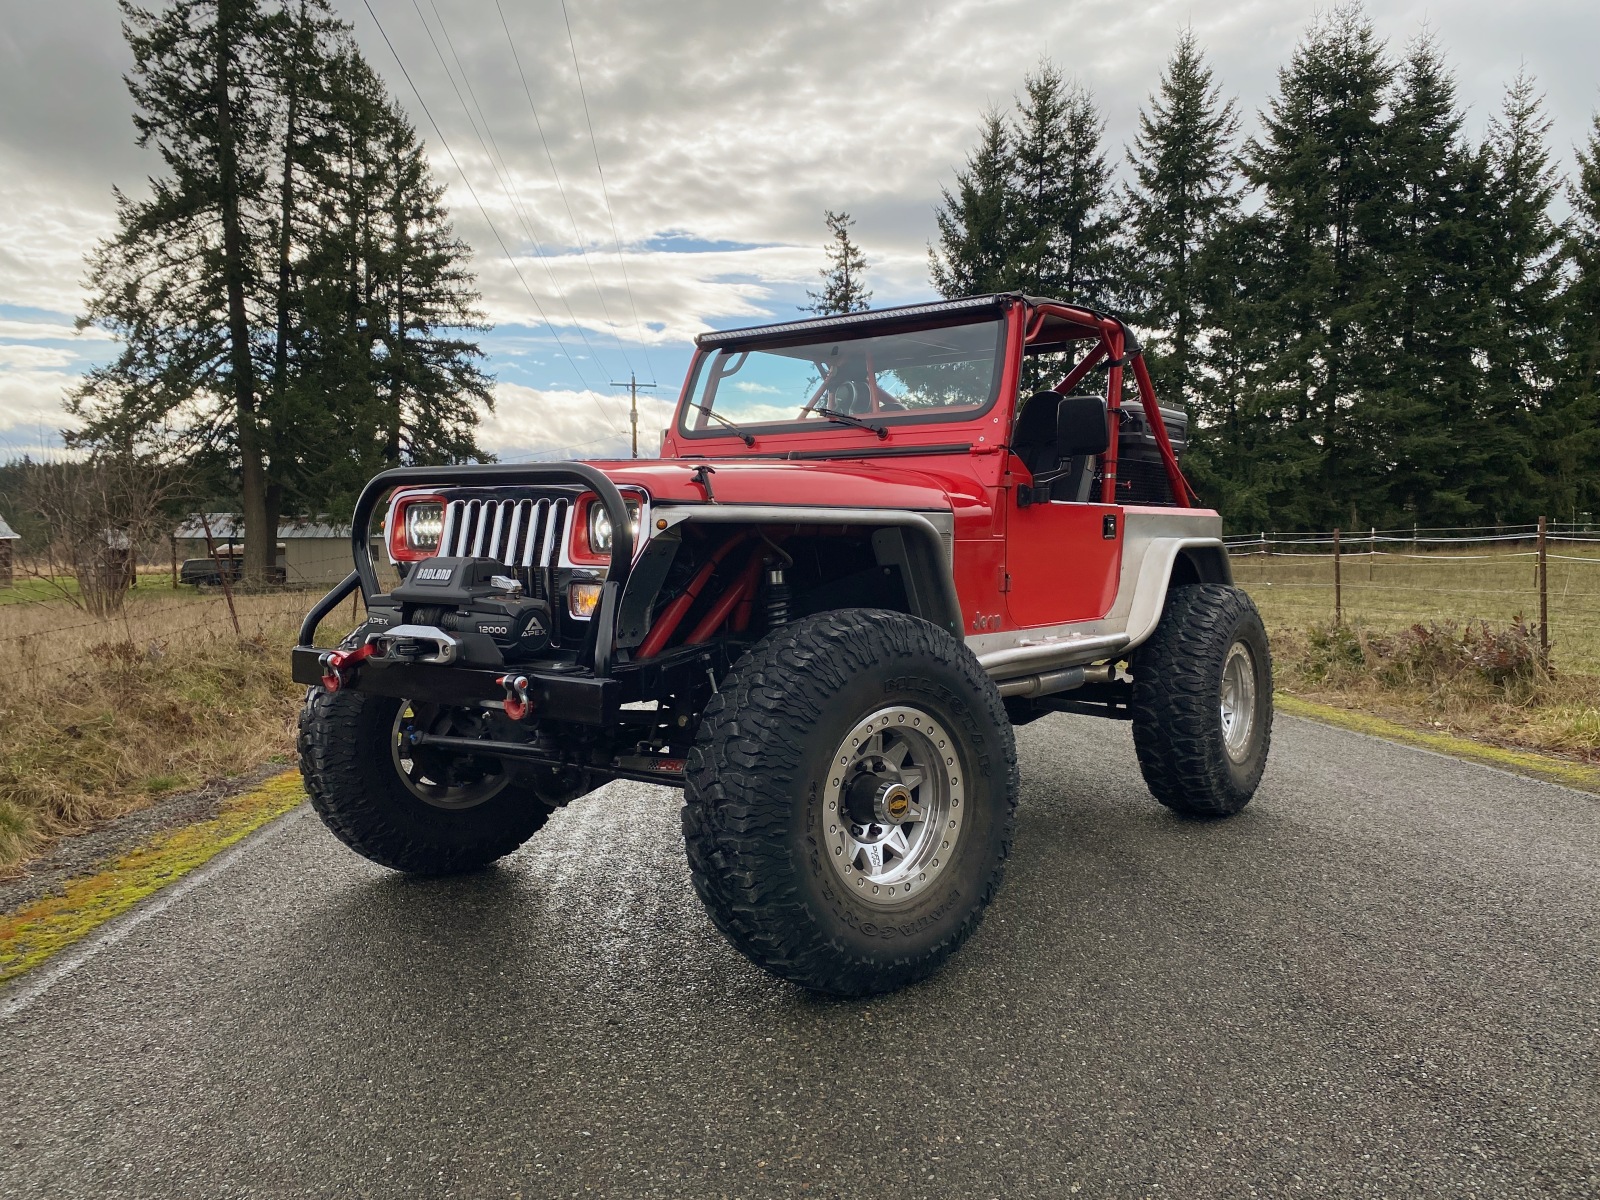 For Sale: Jeep Wrangler YJ with V8 and 1-ton Axles  - photo1